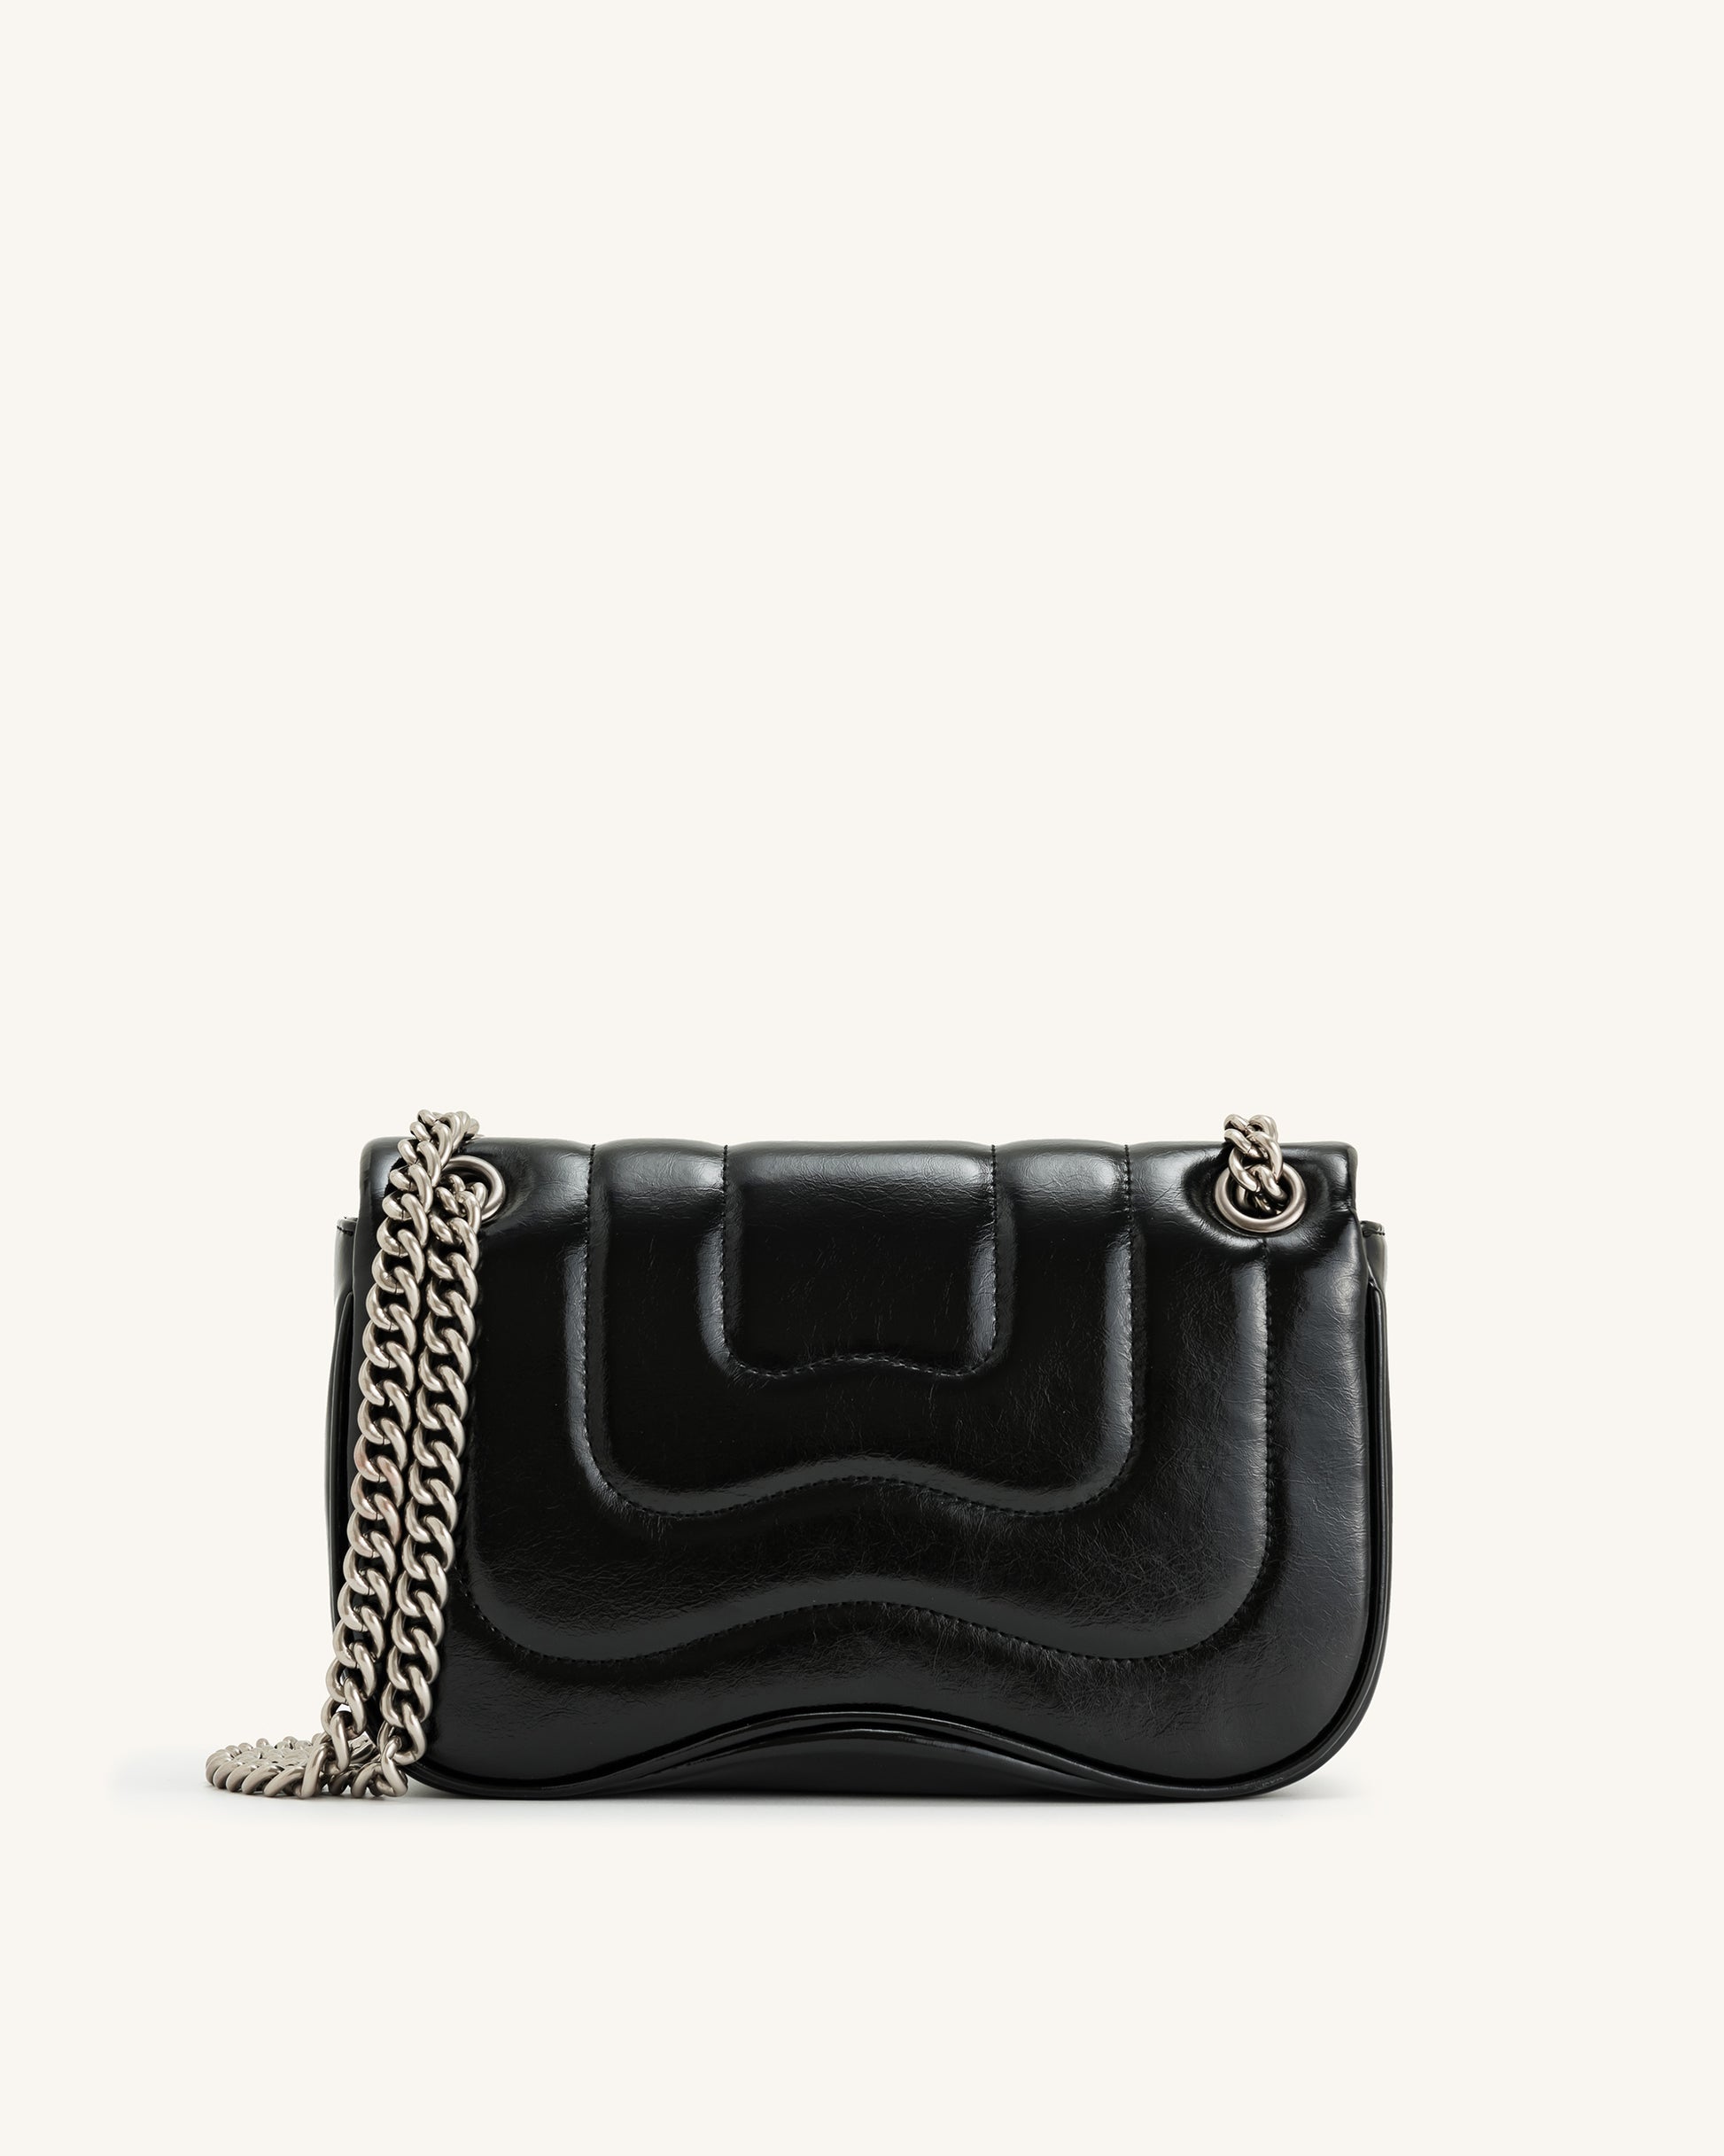 Tina Quilted Chain Crossbody - Black - JW PEI